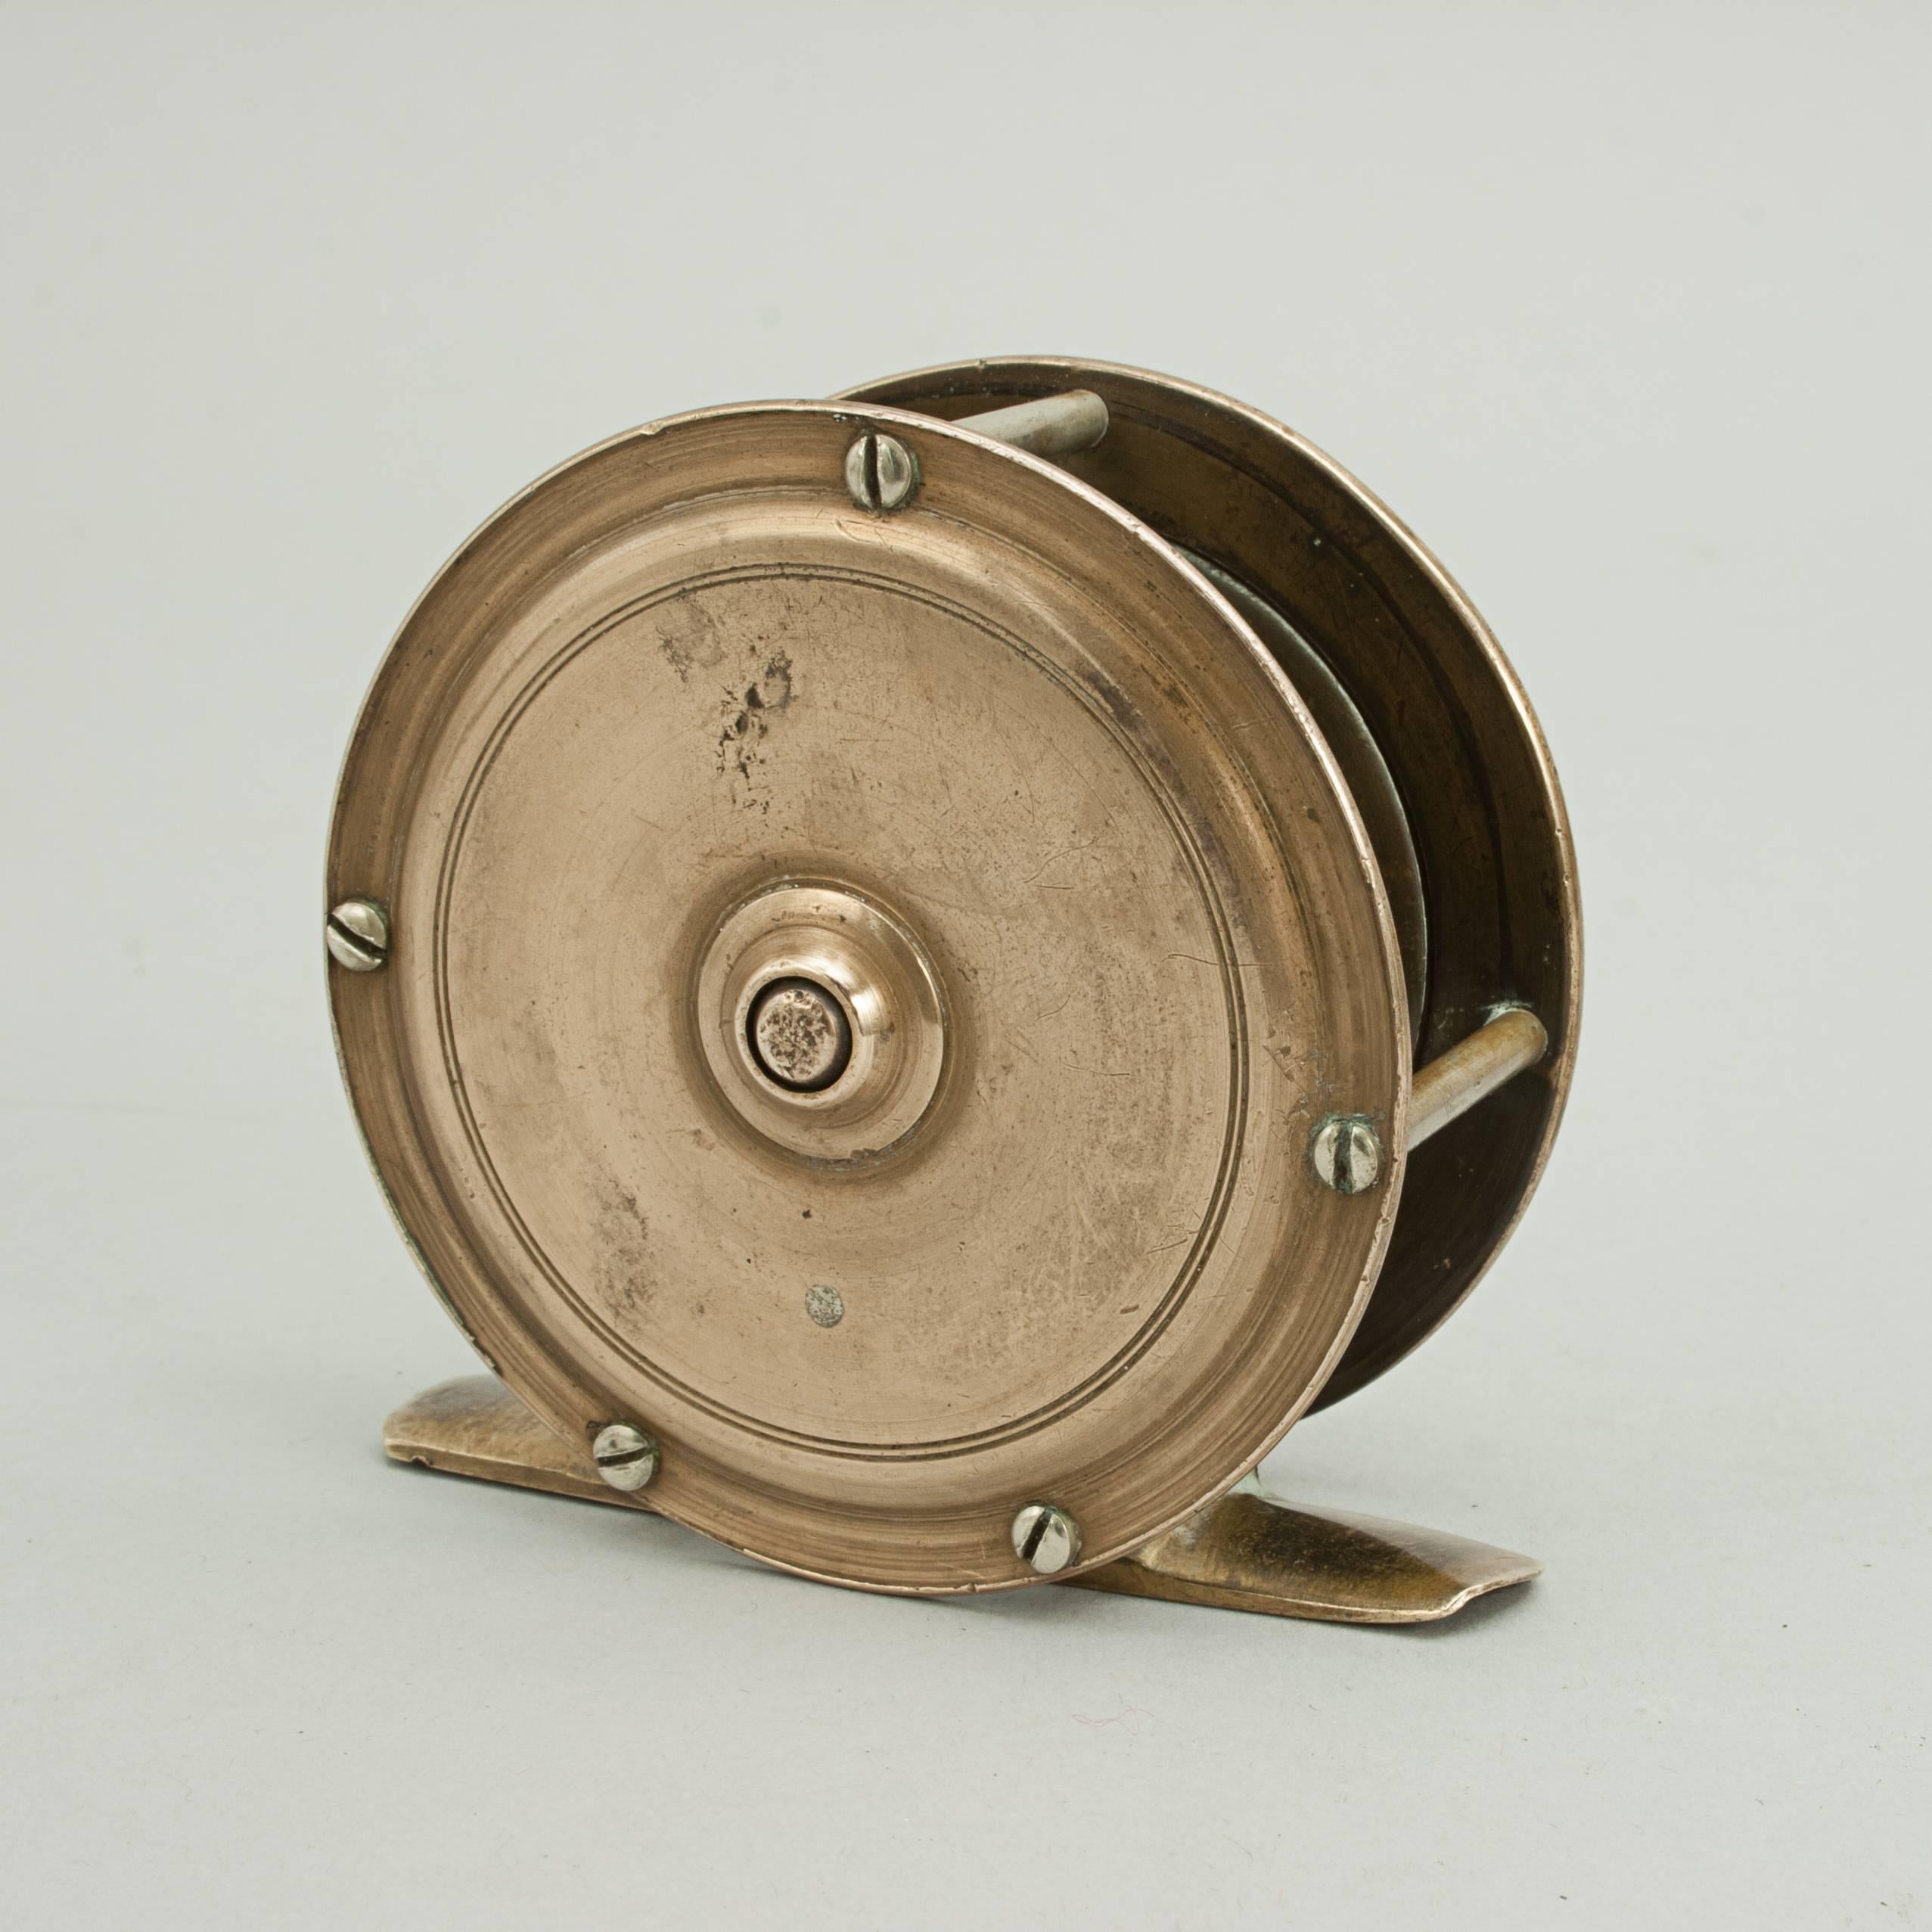 Early 20th Century Trout Fishing Reel by Ramsbottom